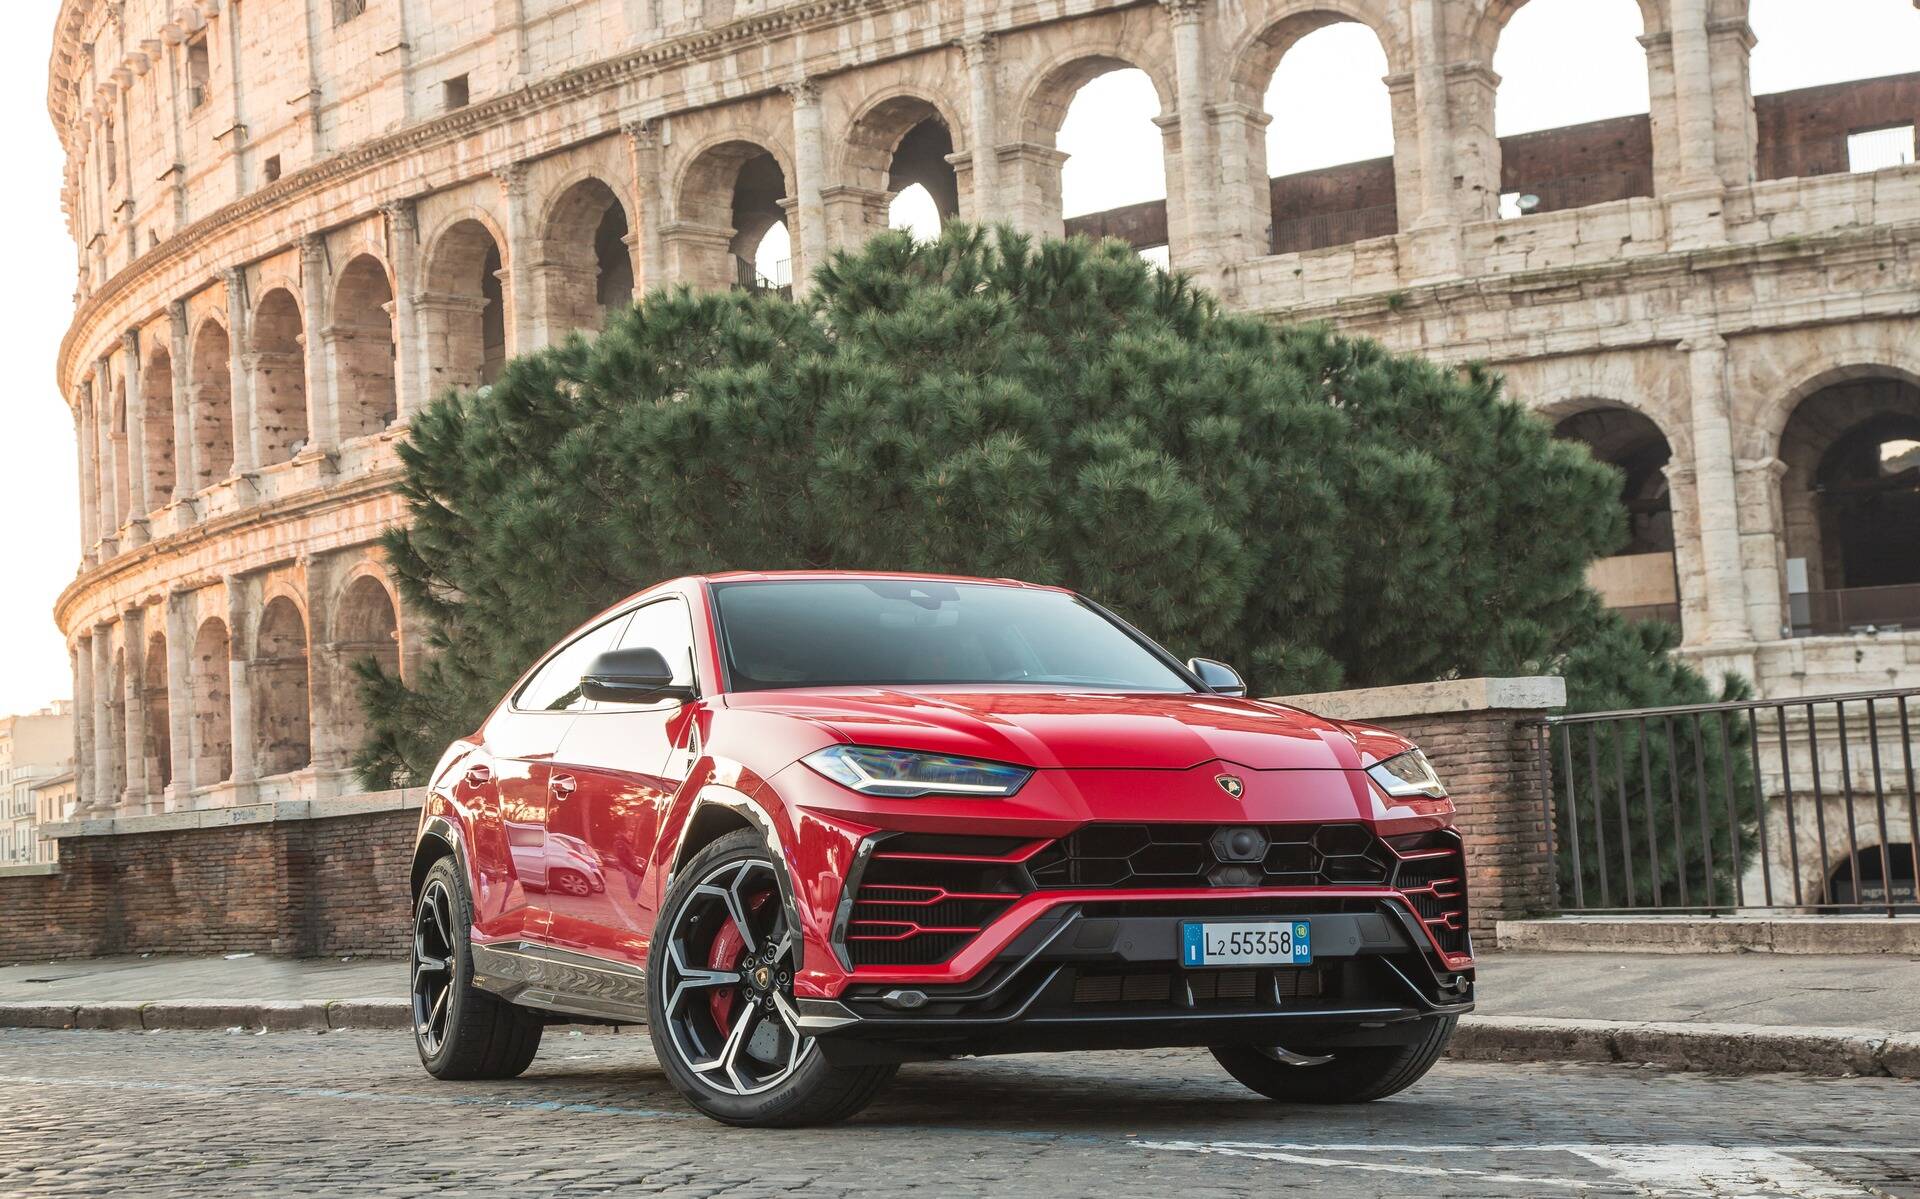 2022 Lamborghini Urus - News, reviews, picture galleries and videos - The  Car Guide